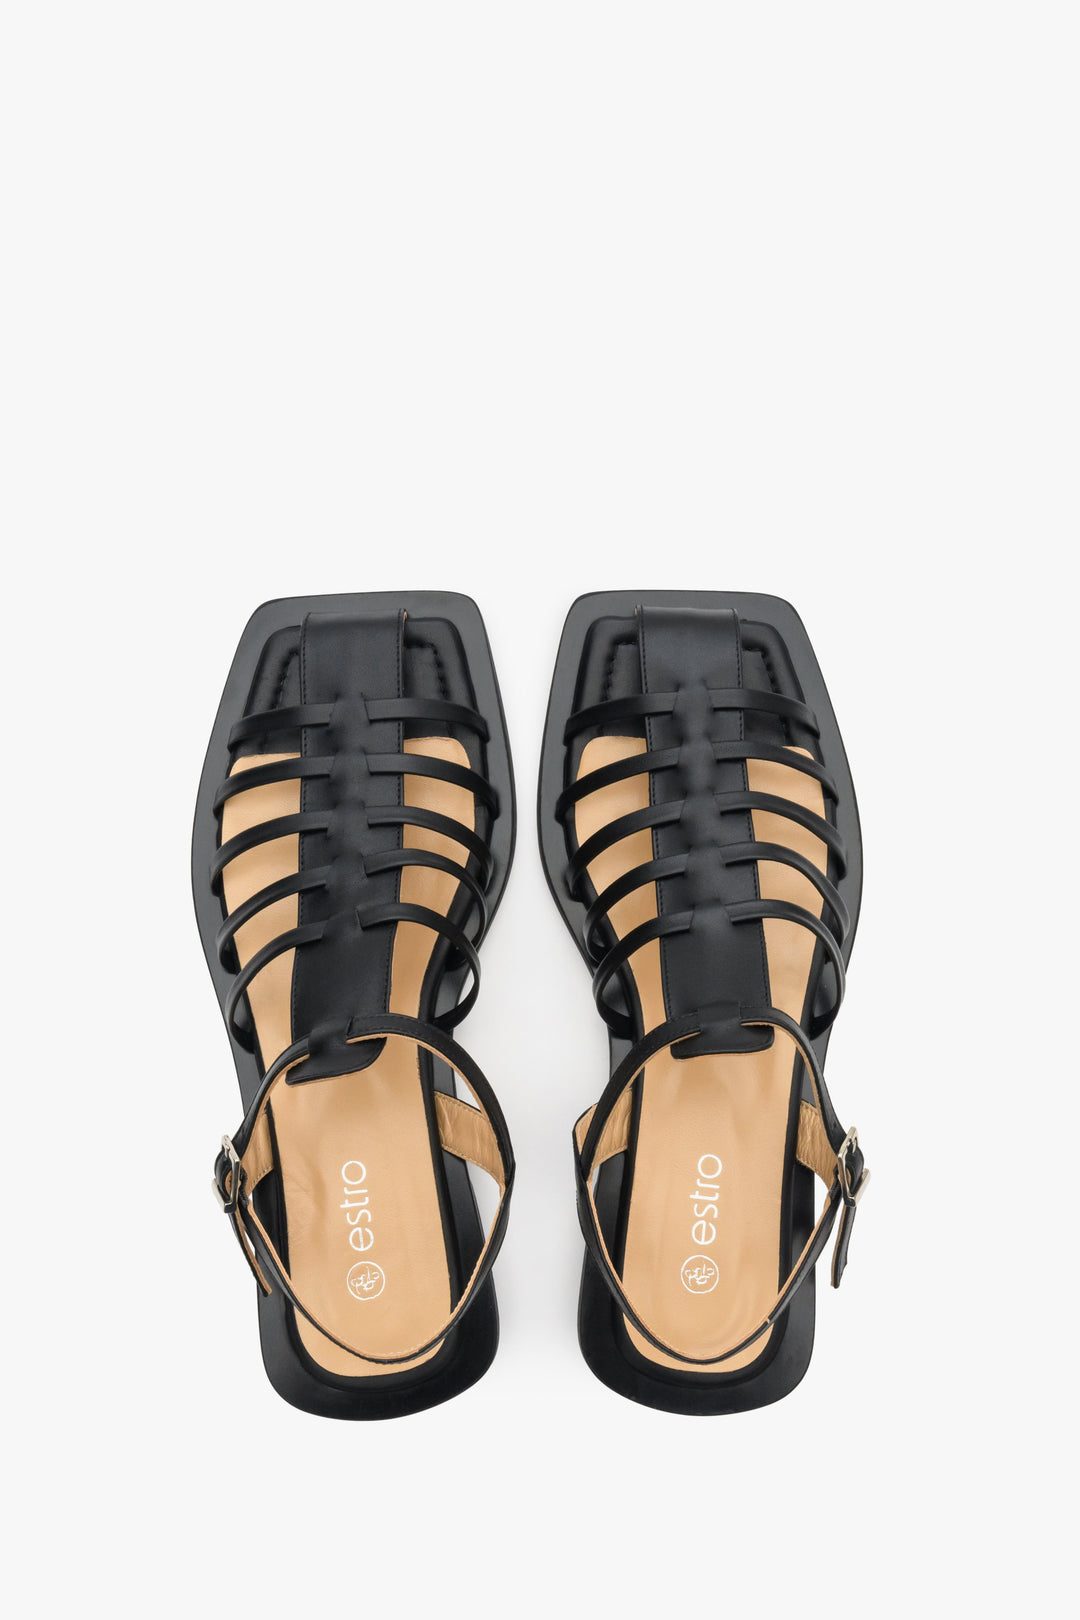 Estro women's sandals in black in natural leather with covered toes - presentation of footwear from above.